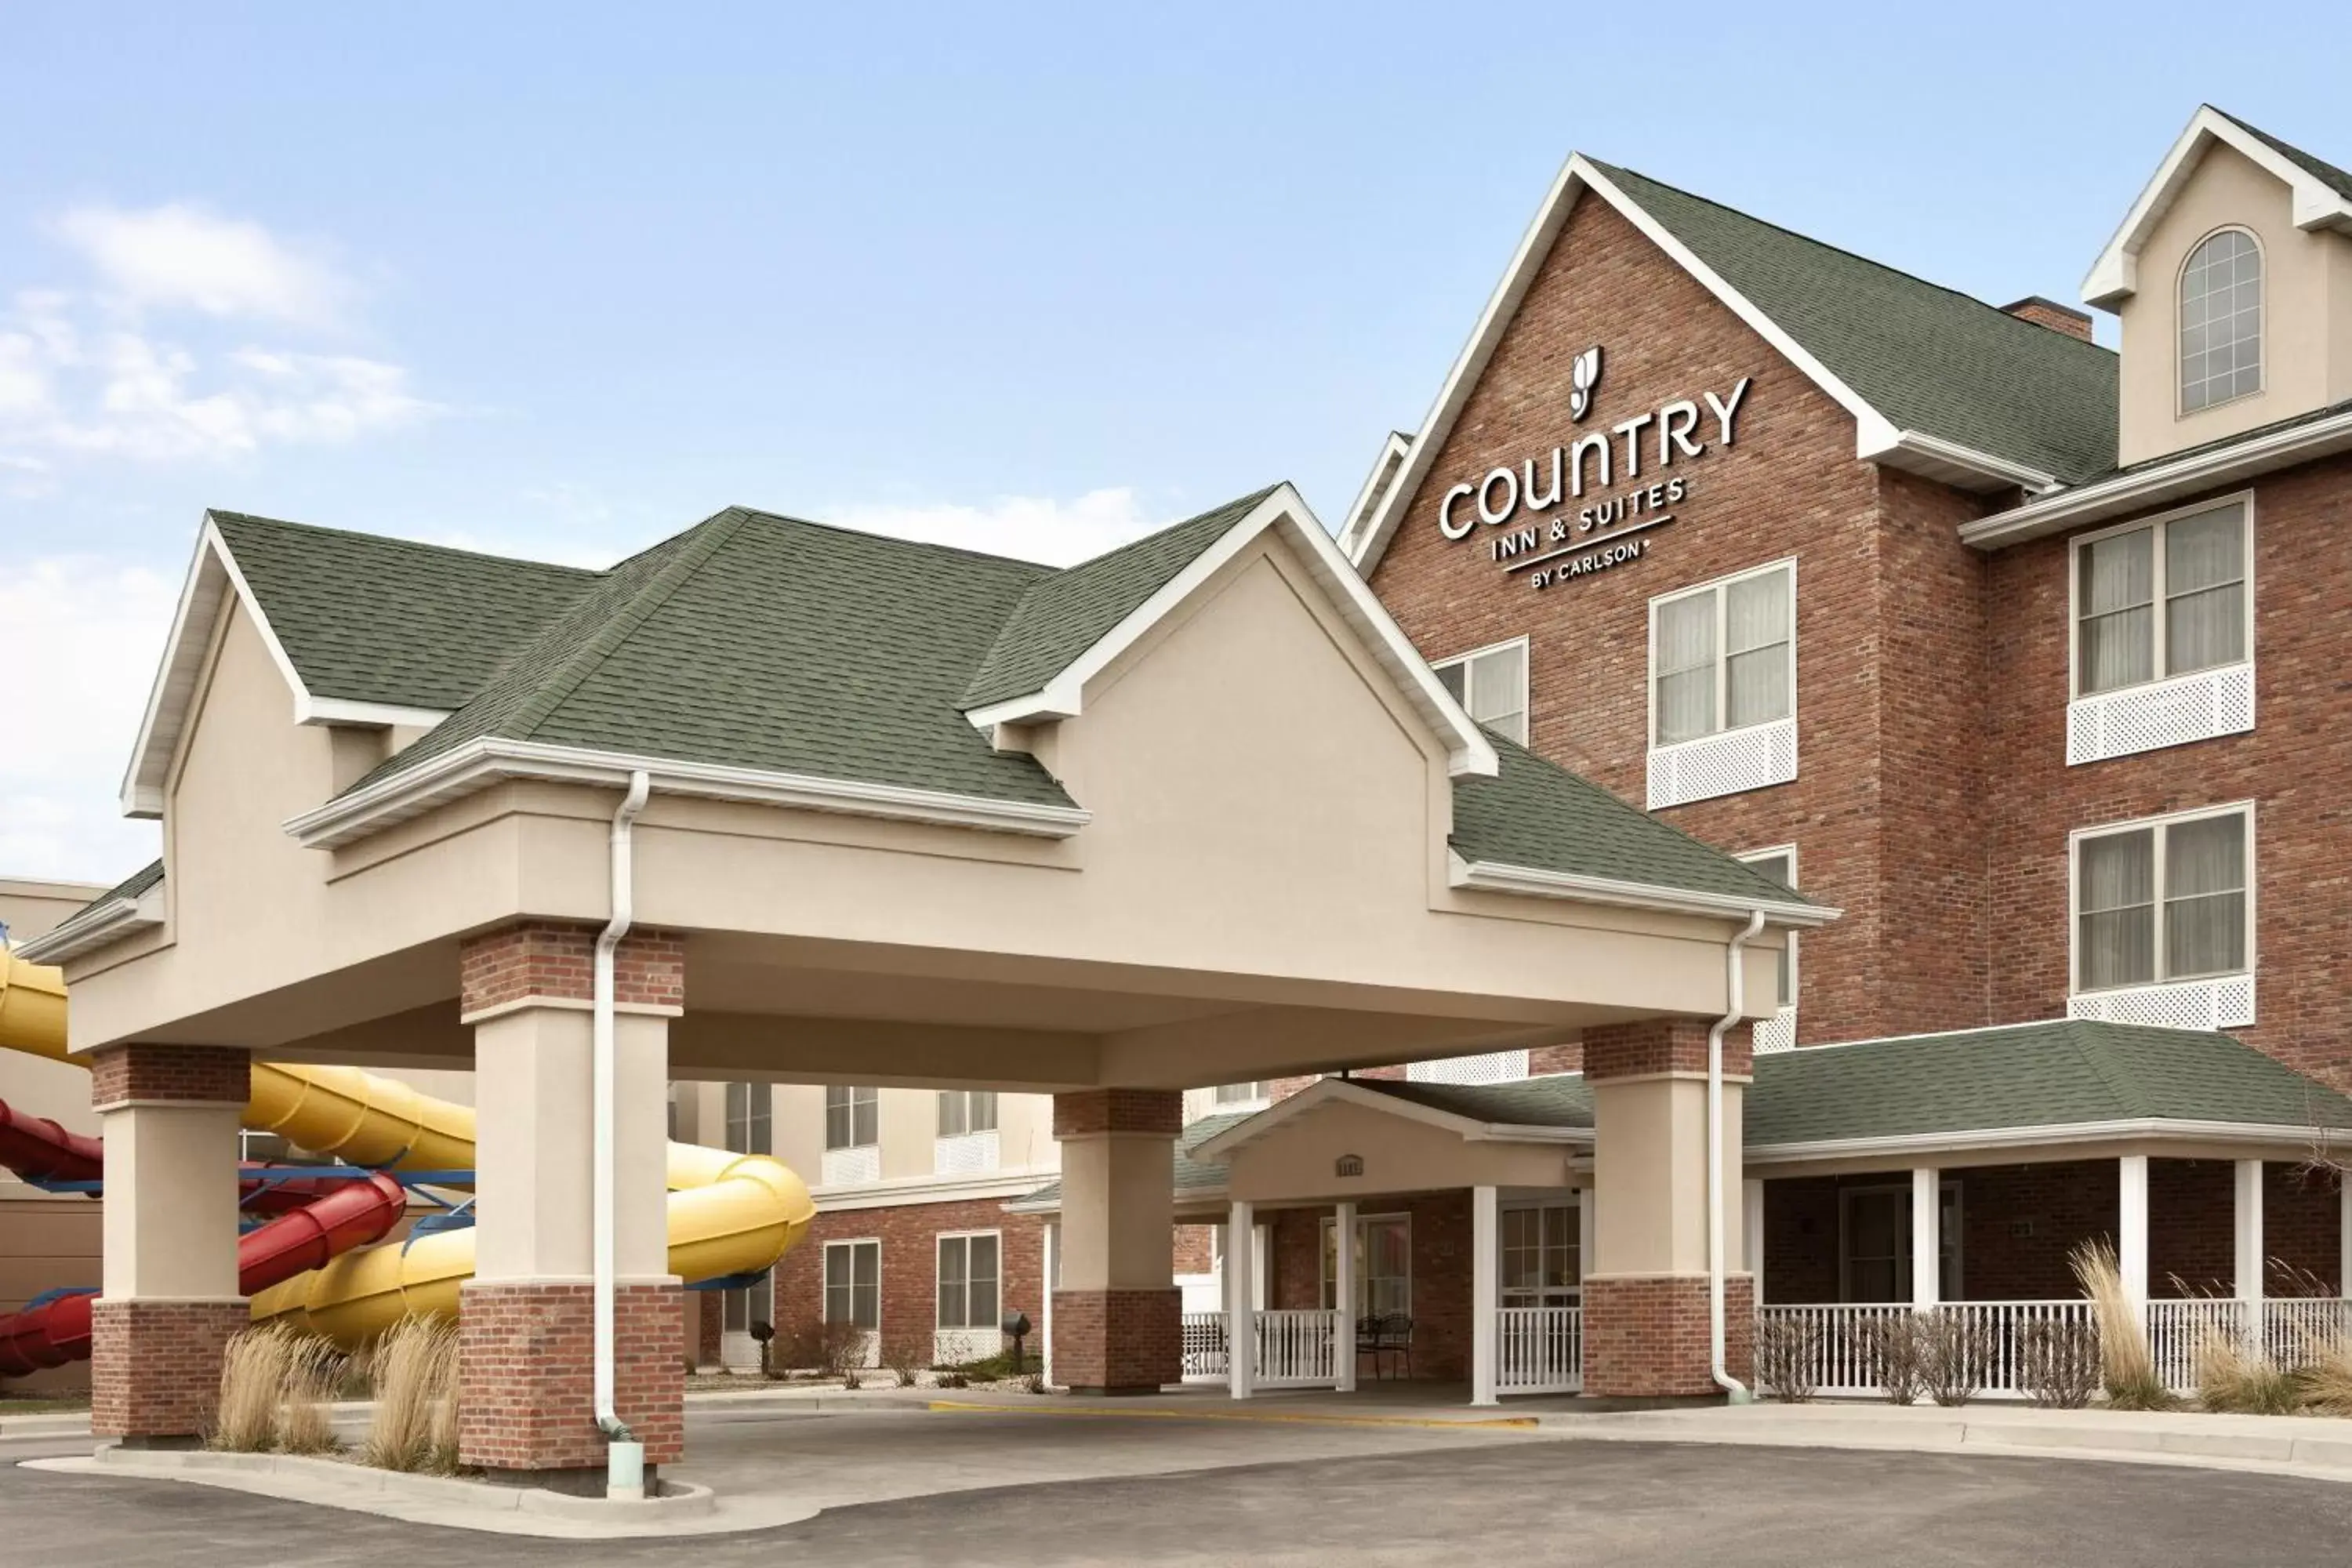 Facade/Entrance in Country Inn & Suites by Radisson, Gillette, WY